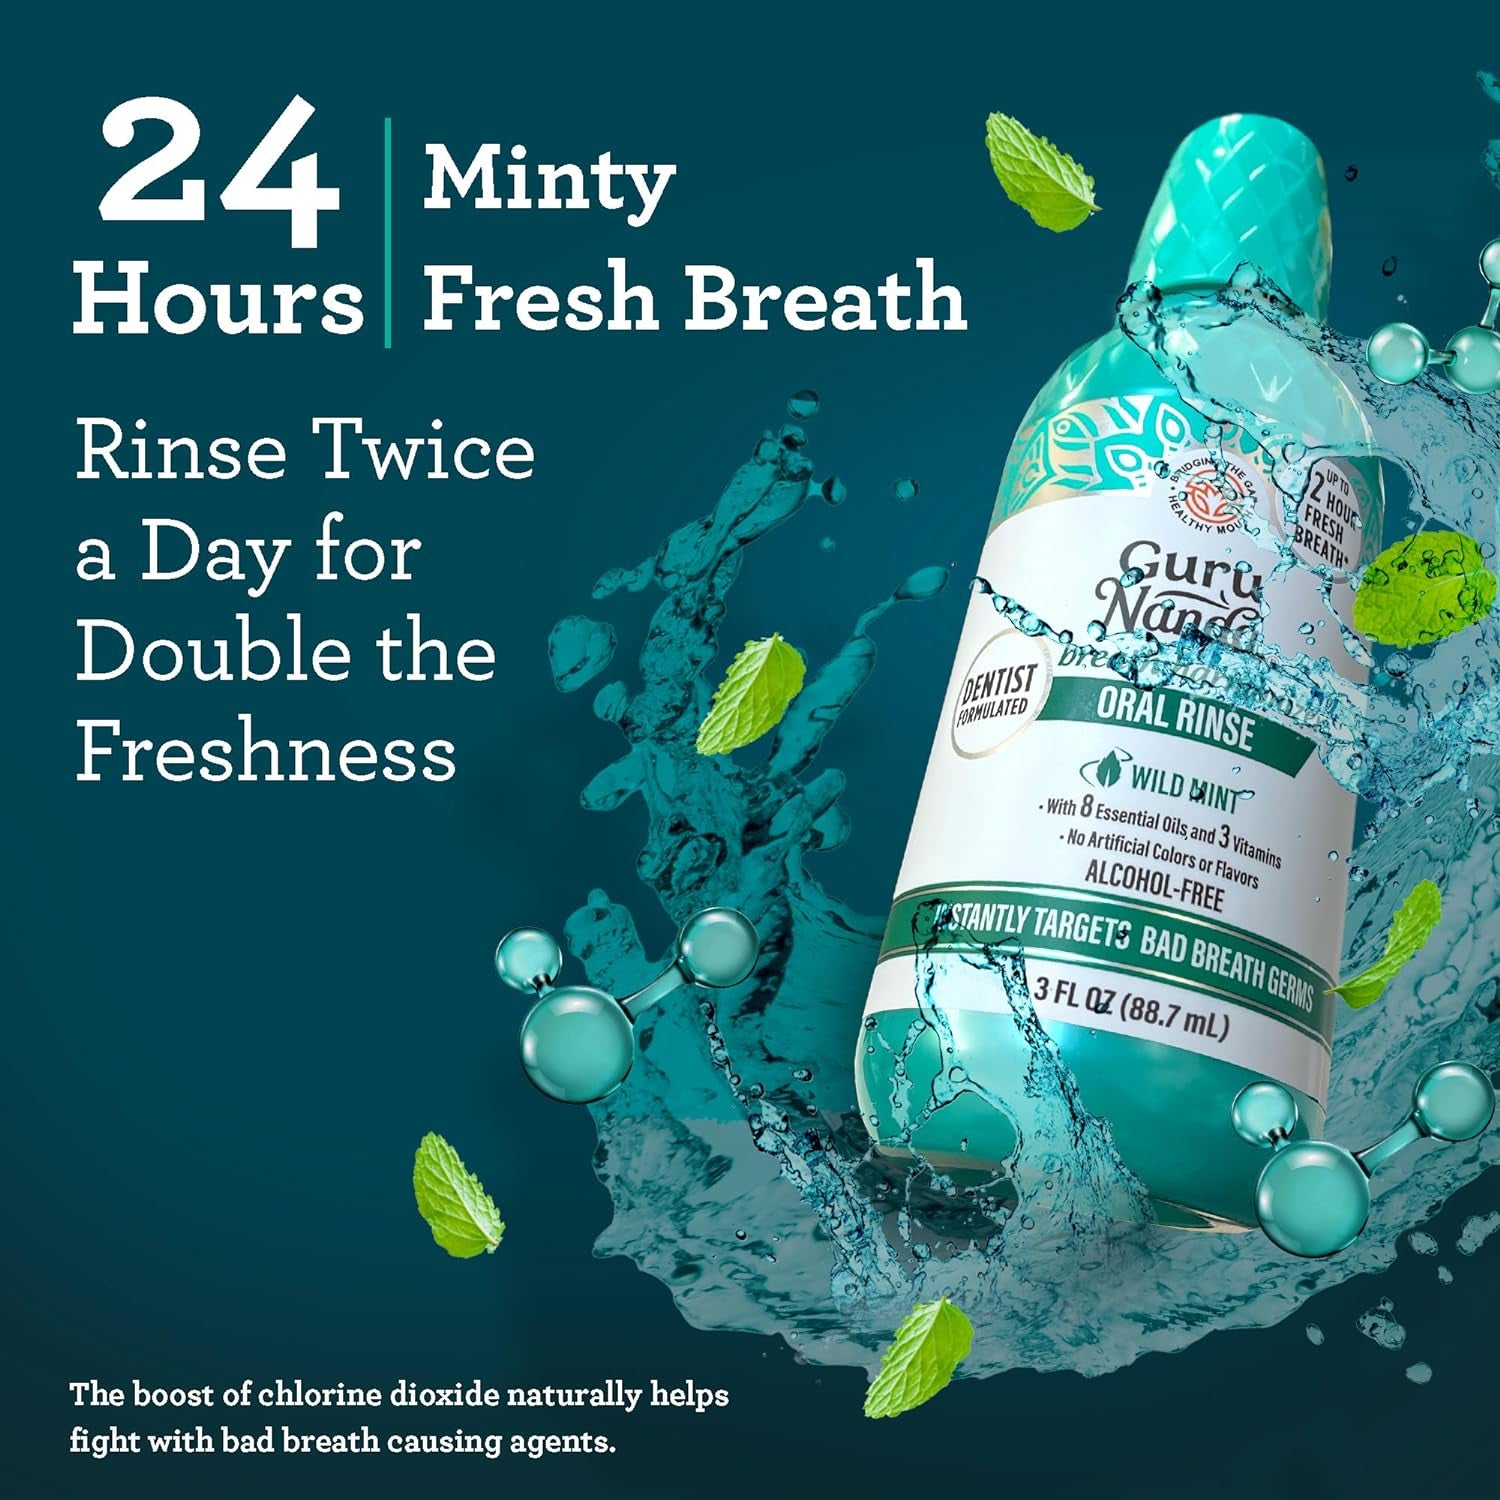 Oral Rinse - Dentist Formulated, Alcohol-Free Mouthwash for Dry Mouth & Bad Breath - Fresh Mint with 7 Essential Oils, Vitamins E,D & K2 for 24 Hours Healthy Smile & Oral Hygiene - 3 Oz